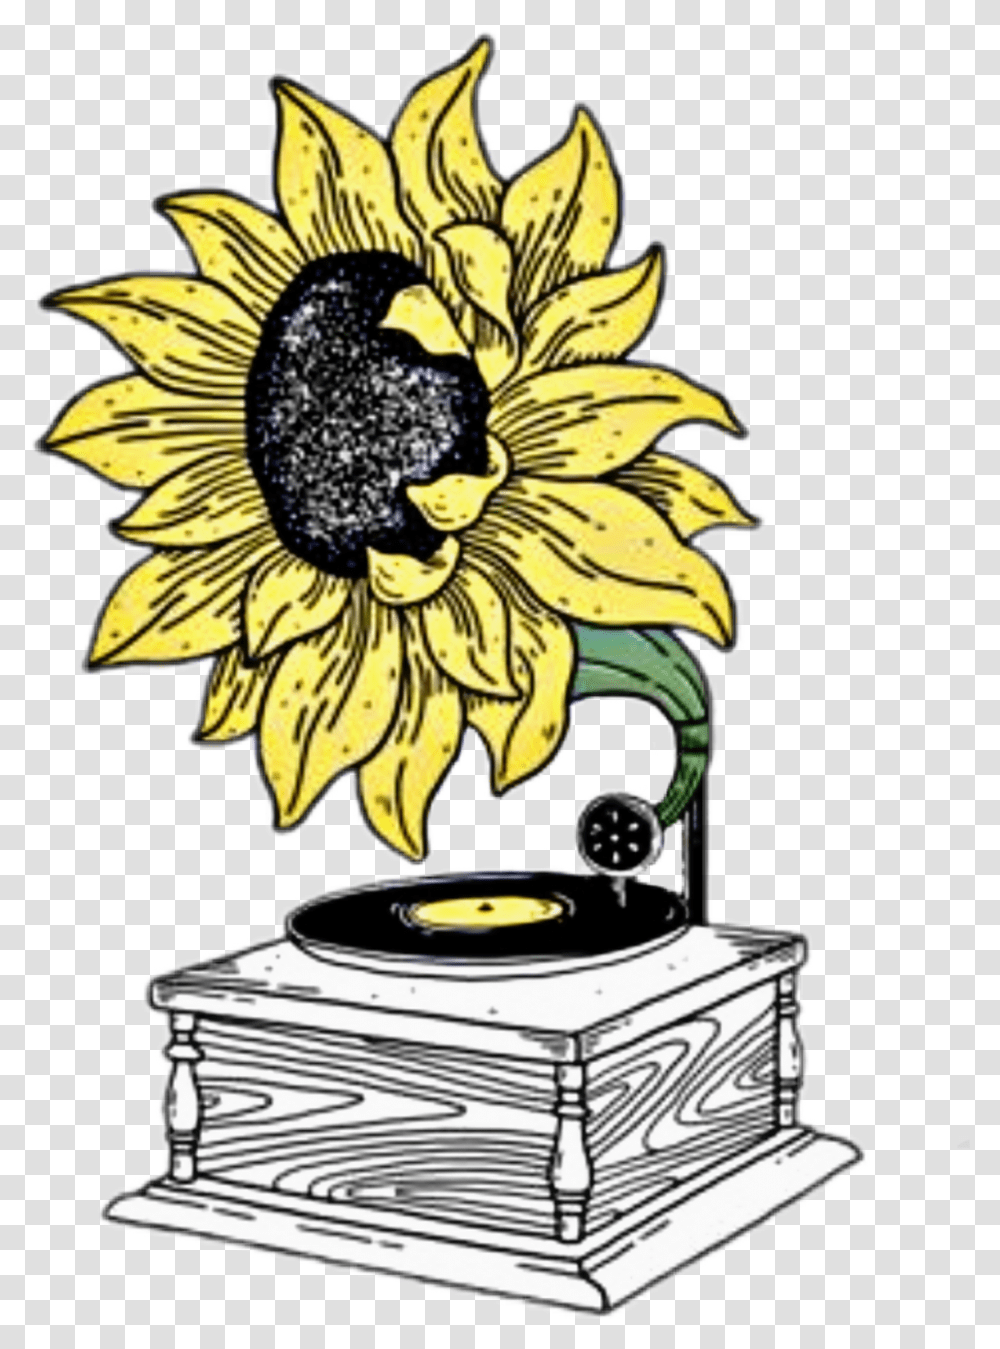 Sunflower Tumblr Aesthetic Flower Stickers, Outdoors, Dj Transparent Png